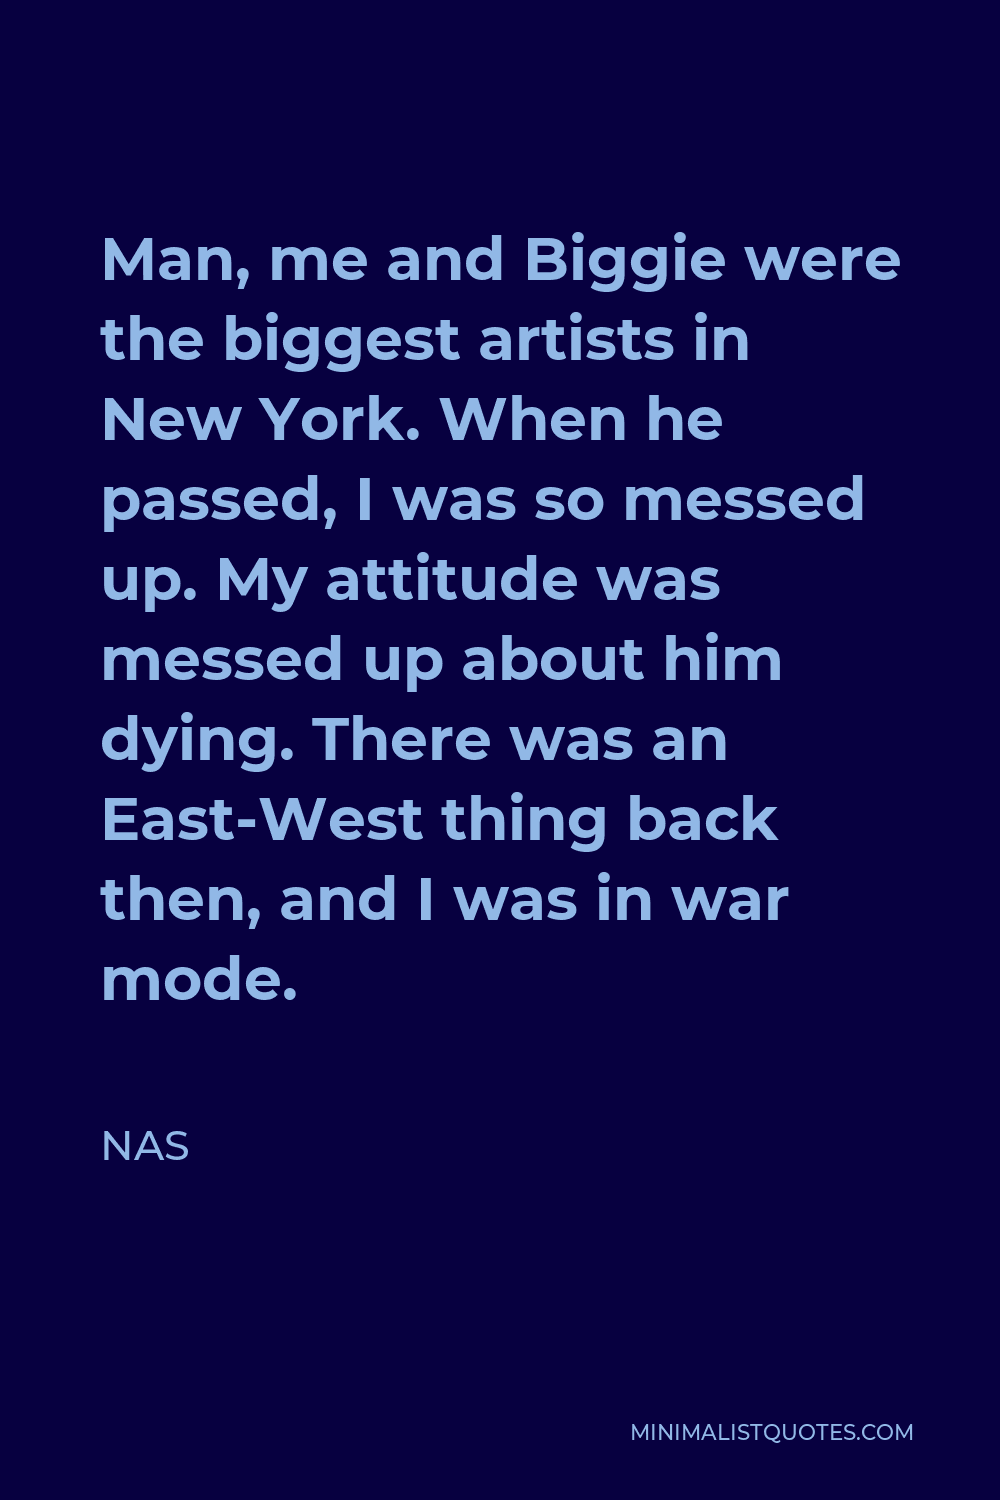 Nas Quote - Man, me and Biggie were the biggest artists in New York. When he passed, I was so messed up. My attitude was messed up about him dying. There was an East-West thing back then, and I was in war mode.